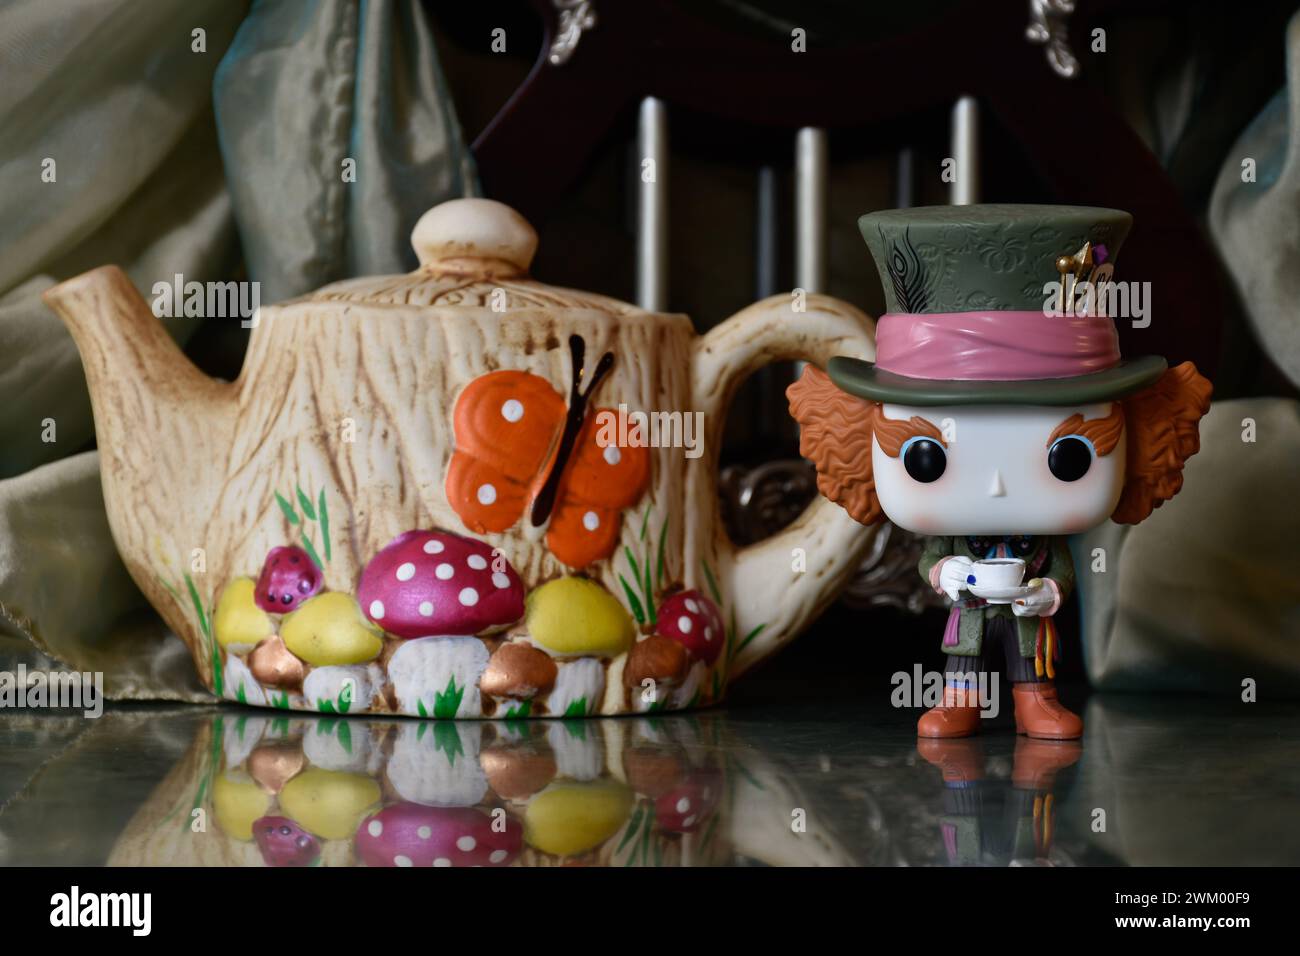 Funko Pop action figure of Mad Hatter from fantasy movie Alice in Wonderland. Handmade colorful teapot, fabulous palace, columns, reflection floor. Stock Photo